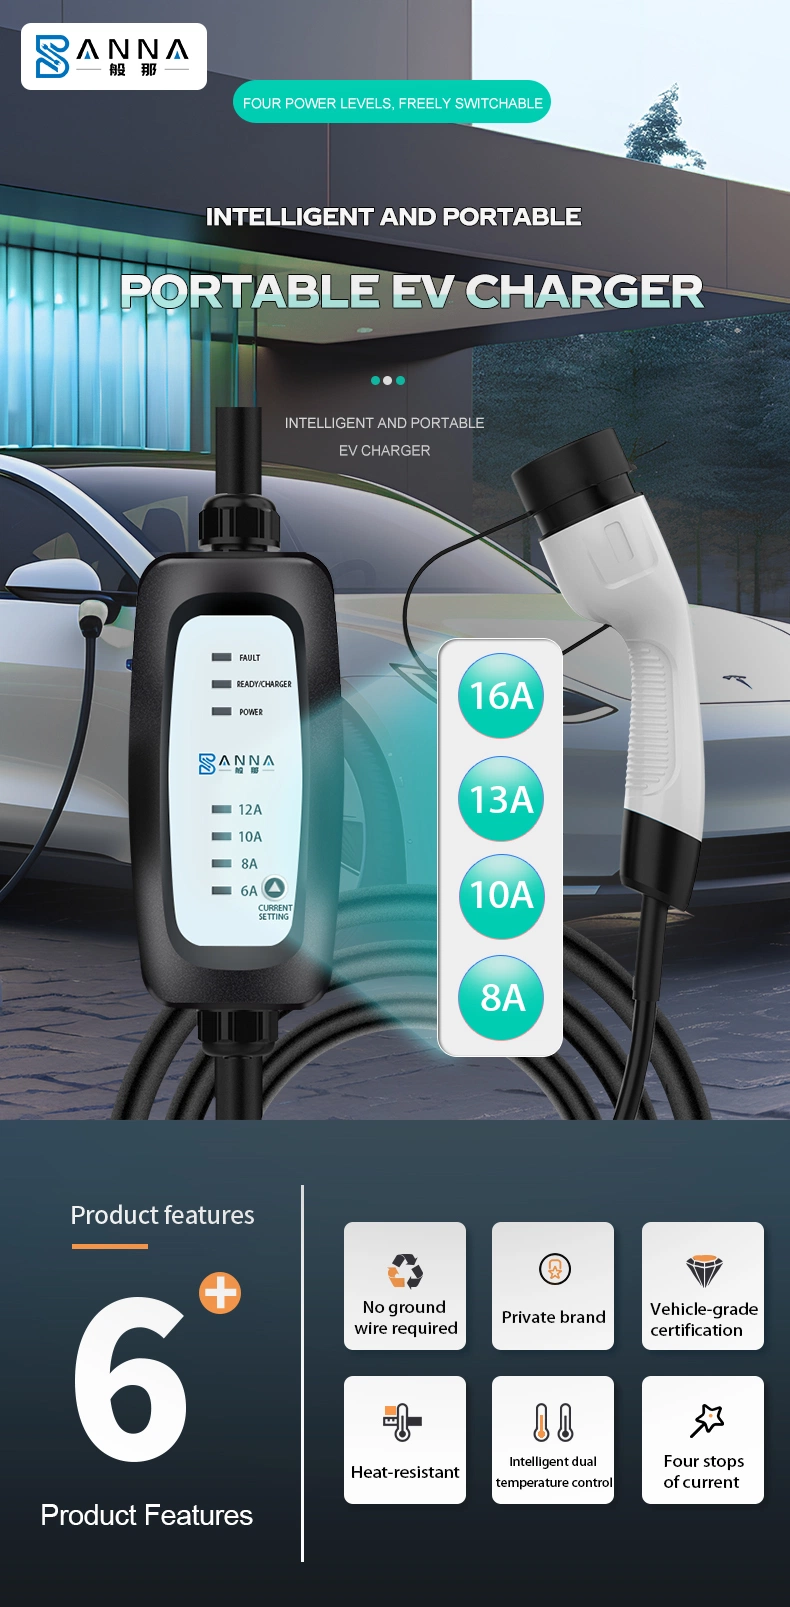 Banna Energy Type 2 / Type 1 /GB-T Electric Car Used Quick Charging Vehicle Portable EV Charger 7.4kw